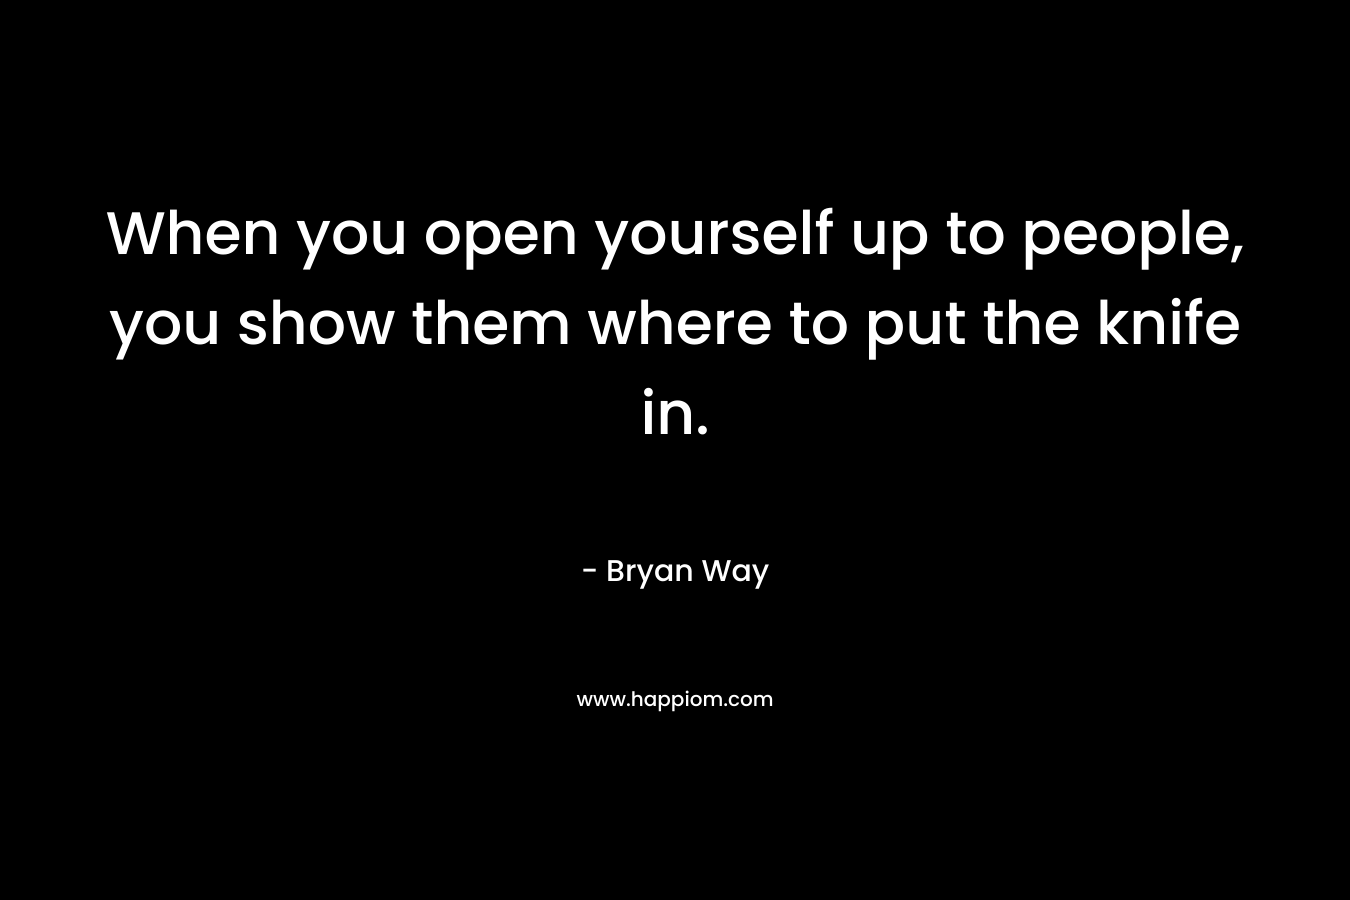 When you open yourself up to people, you show them where to put the knife in.